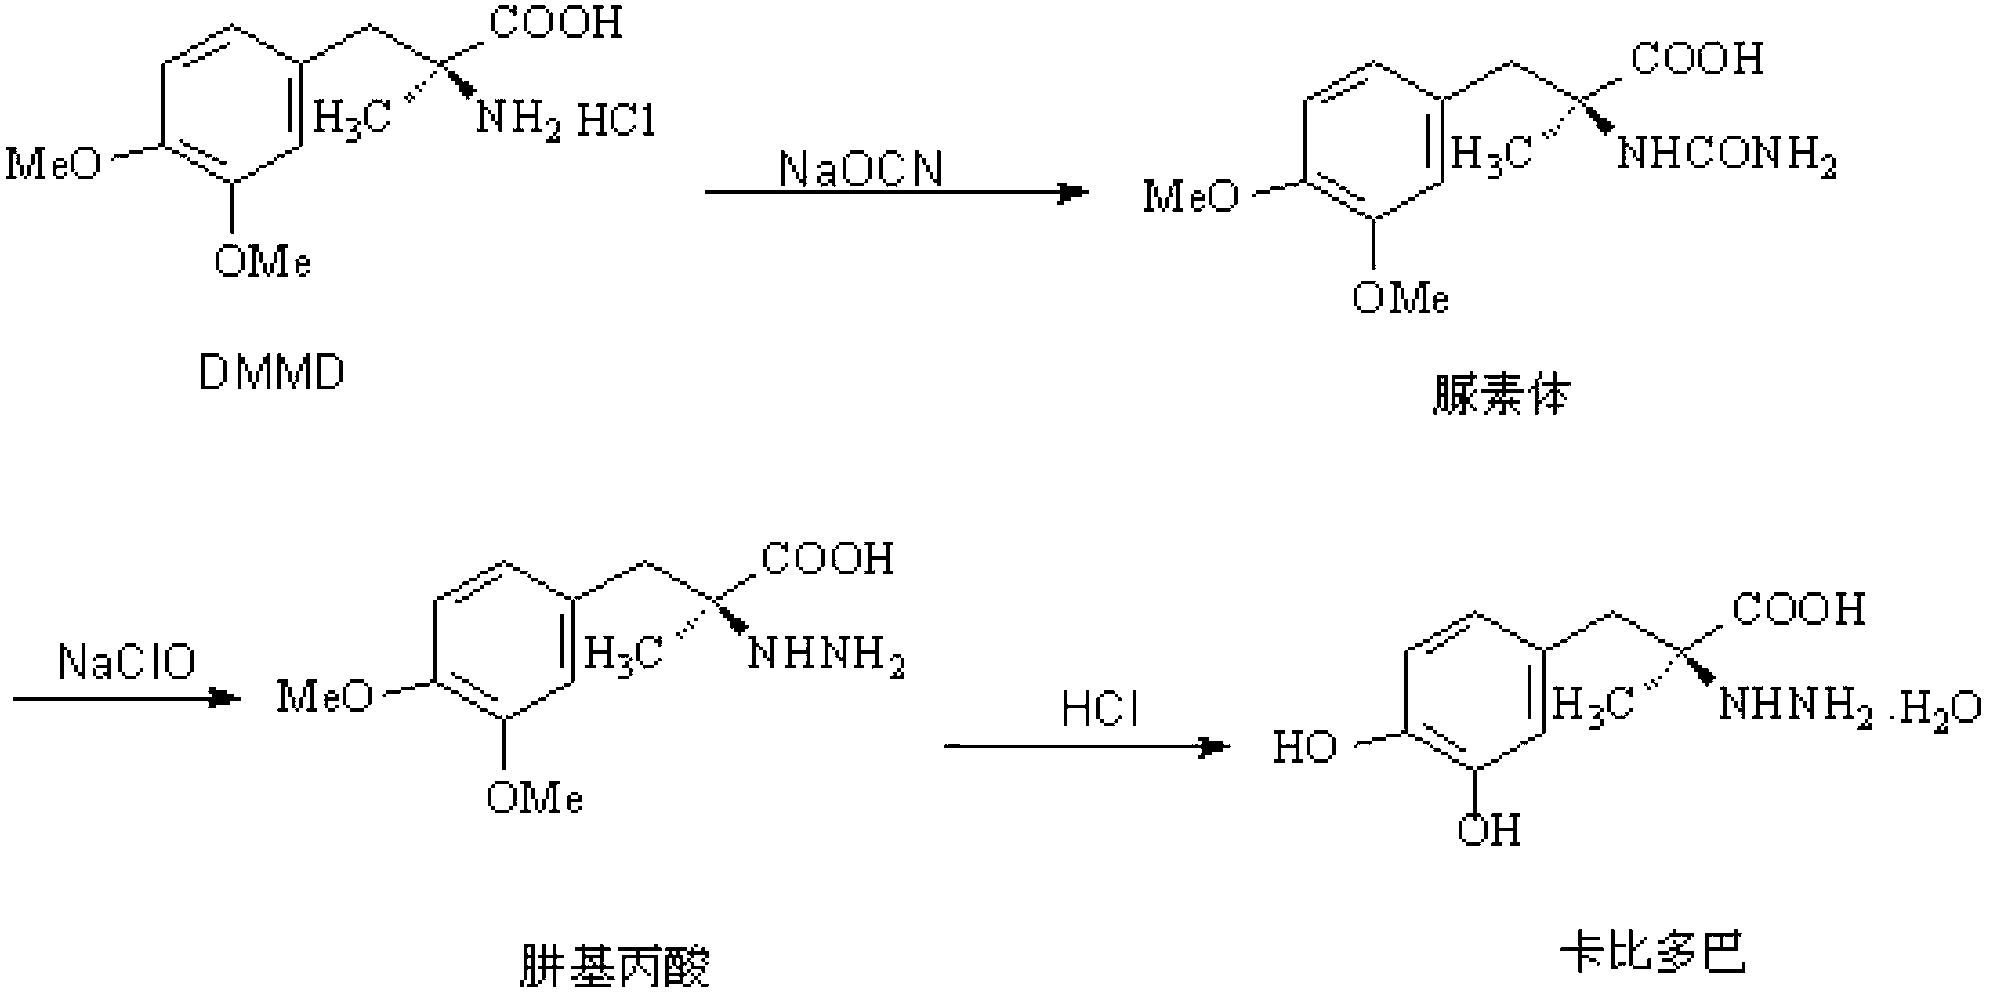 Method for synthesizing carbidopa